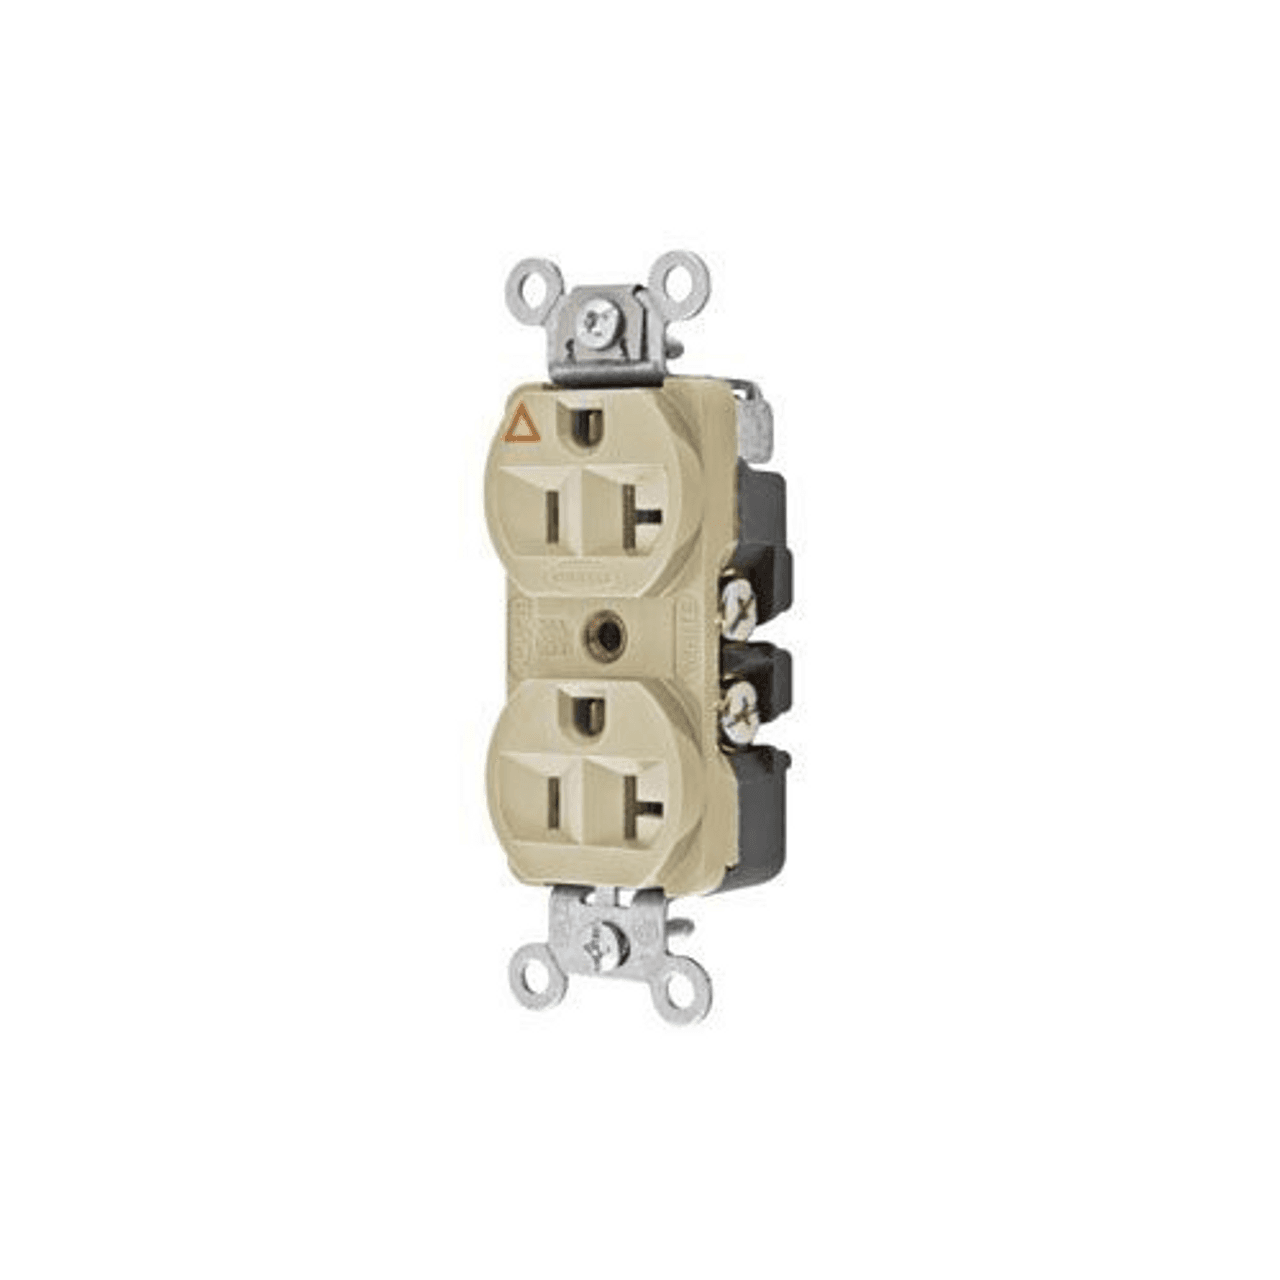 Hubbell CR5352IGI Straight Blade Devices, Receptacles, Duplex,Hubbell-Pro Heavy Duty, 2-Pole 3-Wire Grounding, 20A 125V, 5-20R, Ivory, Single Pack, Isolated Ground.  ; Triangle marking on face indicates isolated ground ; Slender/compact design ; Finder Groove Face ; Isolat